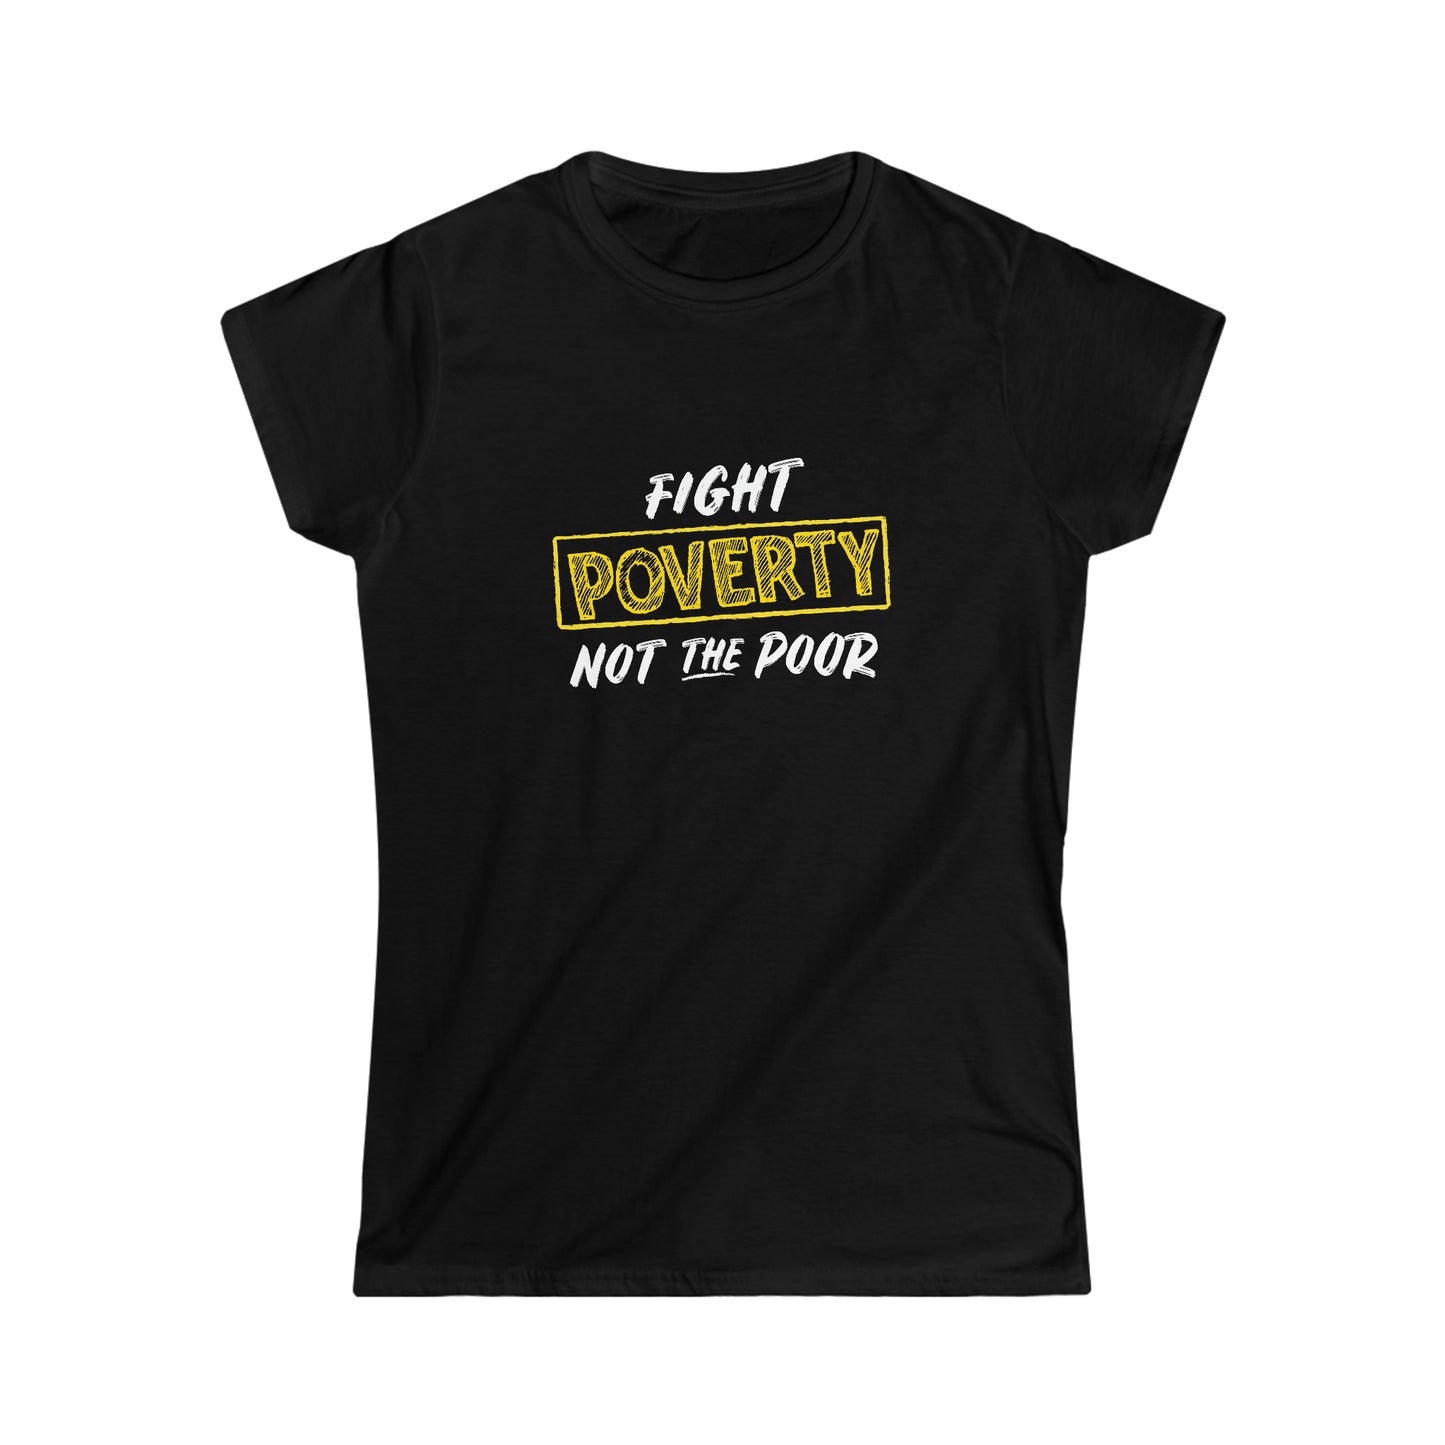 “Fight Poverty Not The Poor” Women’s T-Shirts